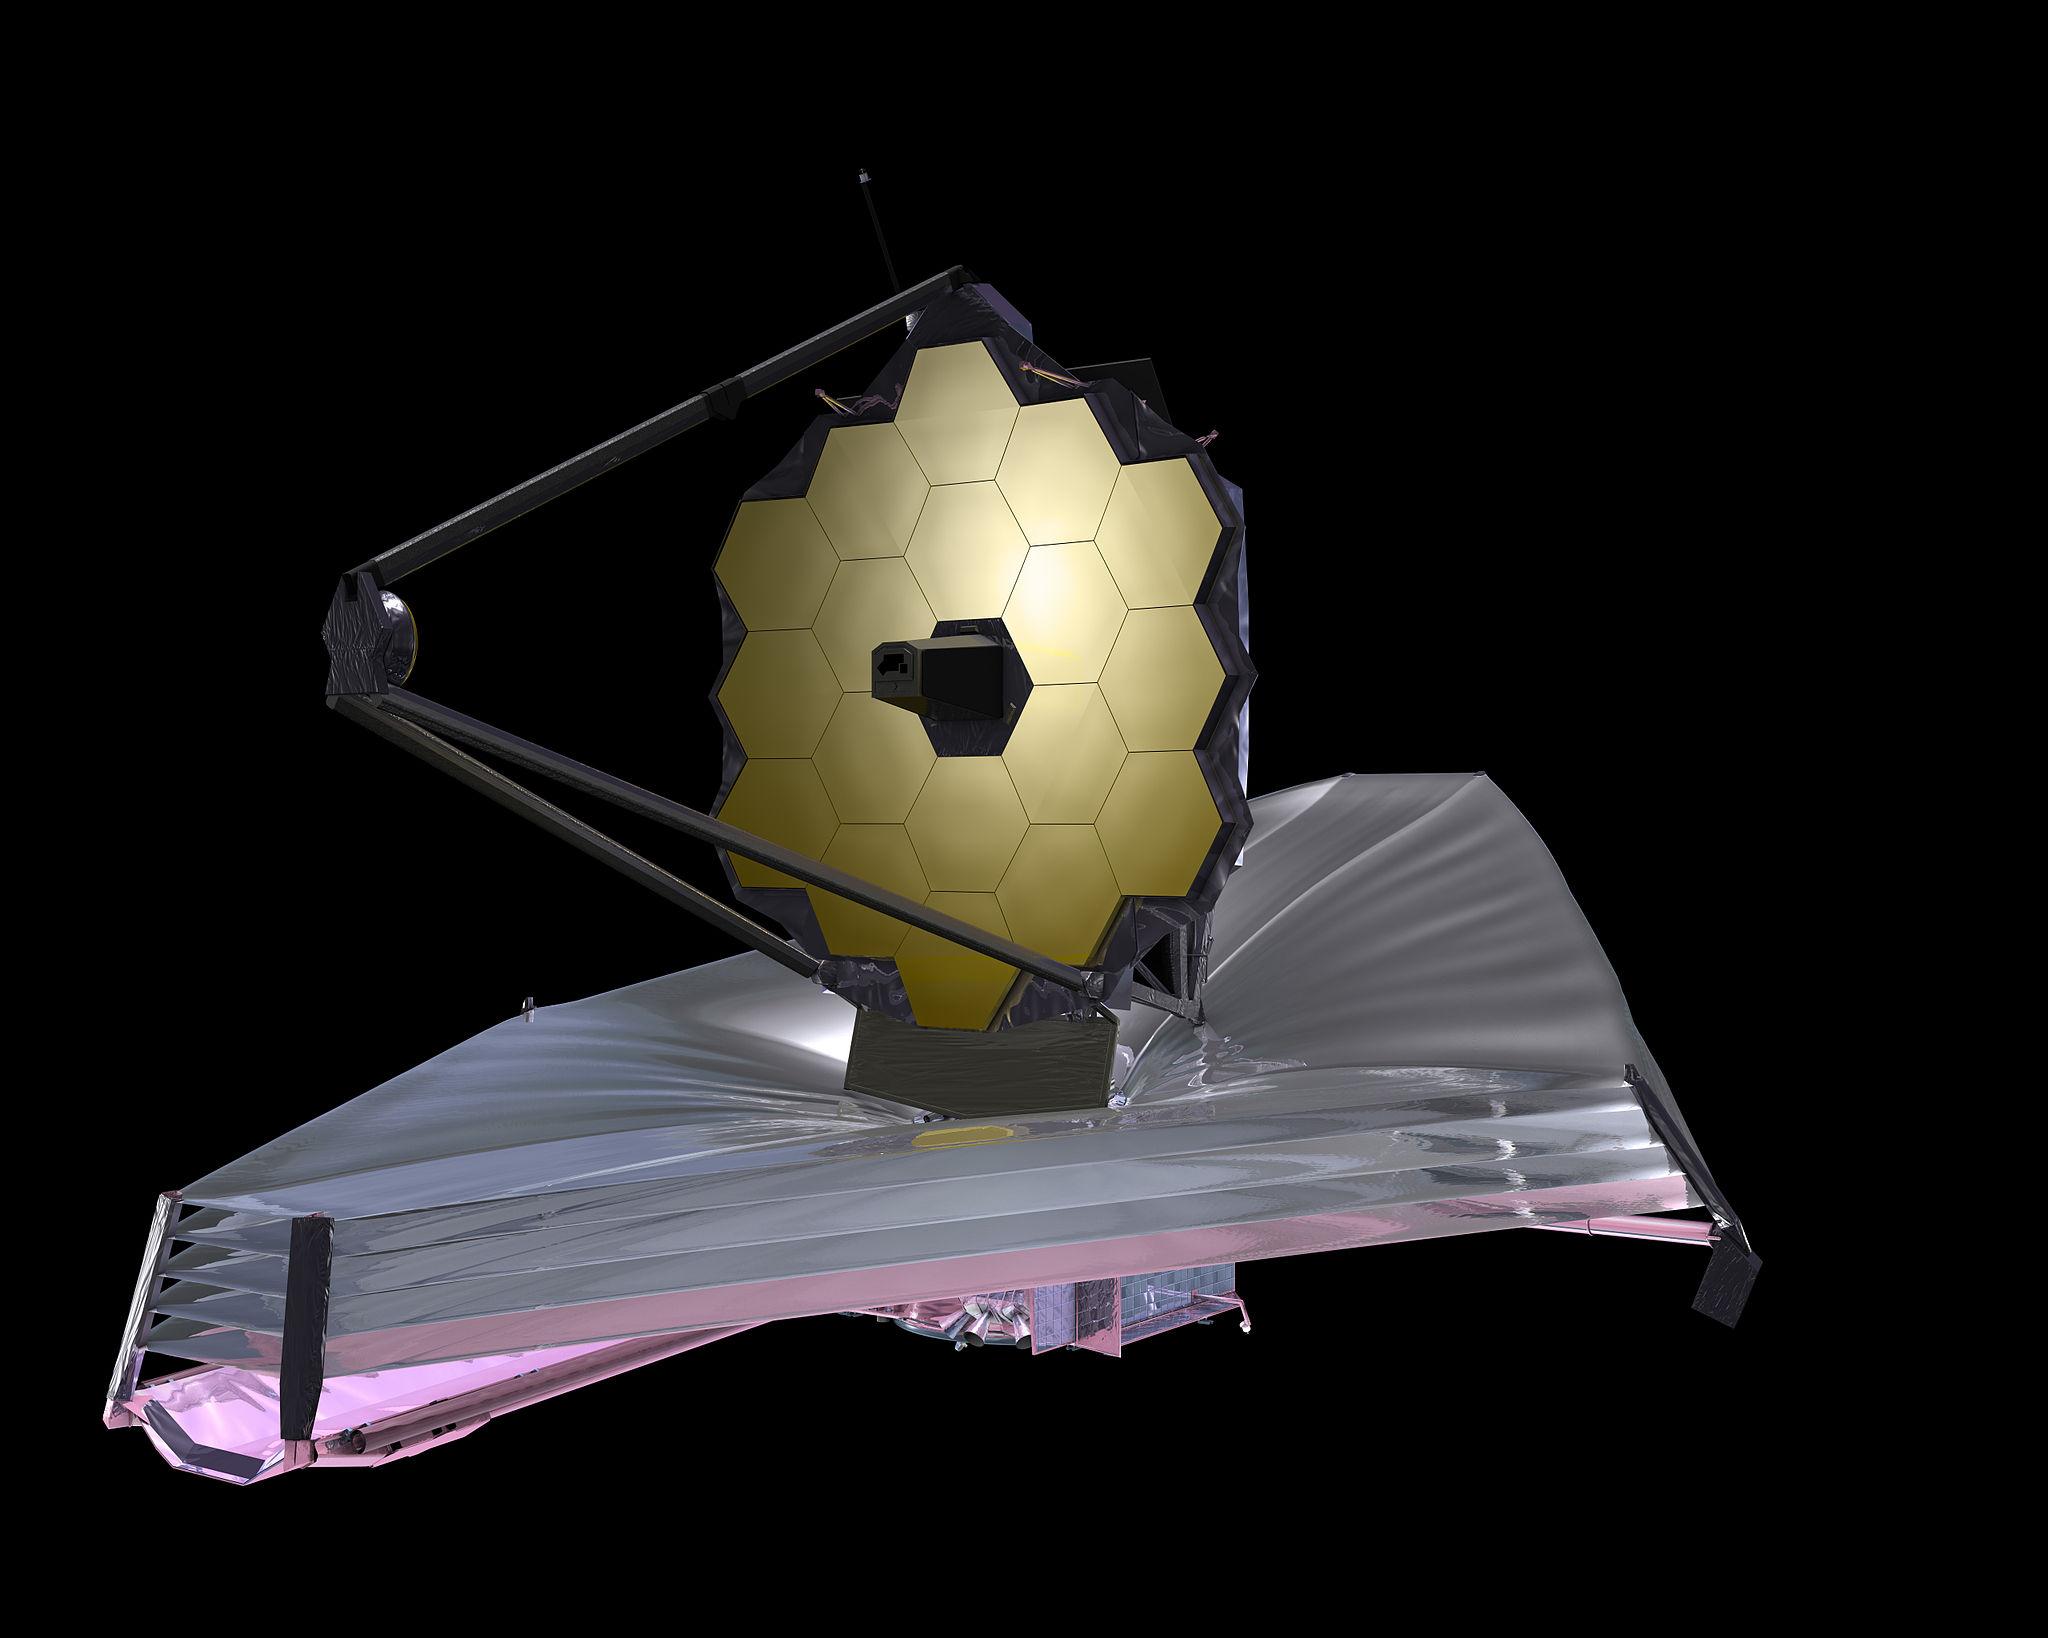 James Webb Telescope promises to answer questions we still don't have answers to (Source: Wikimedia Commons/NASA)